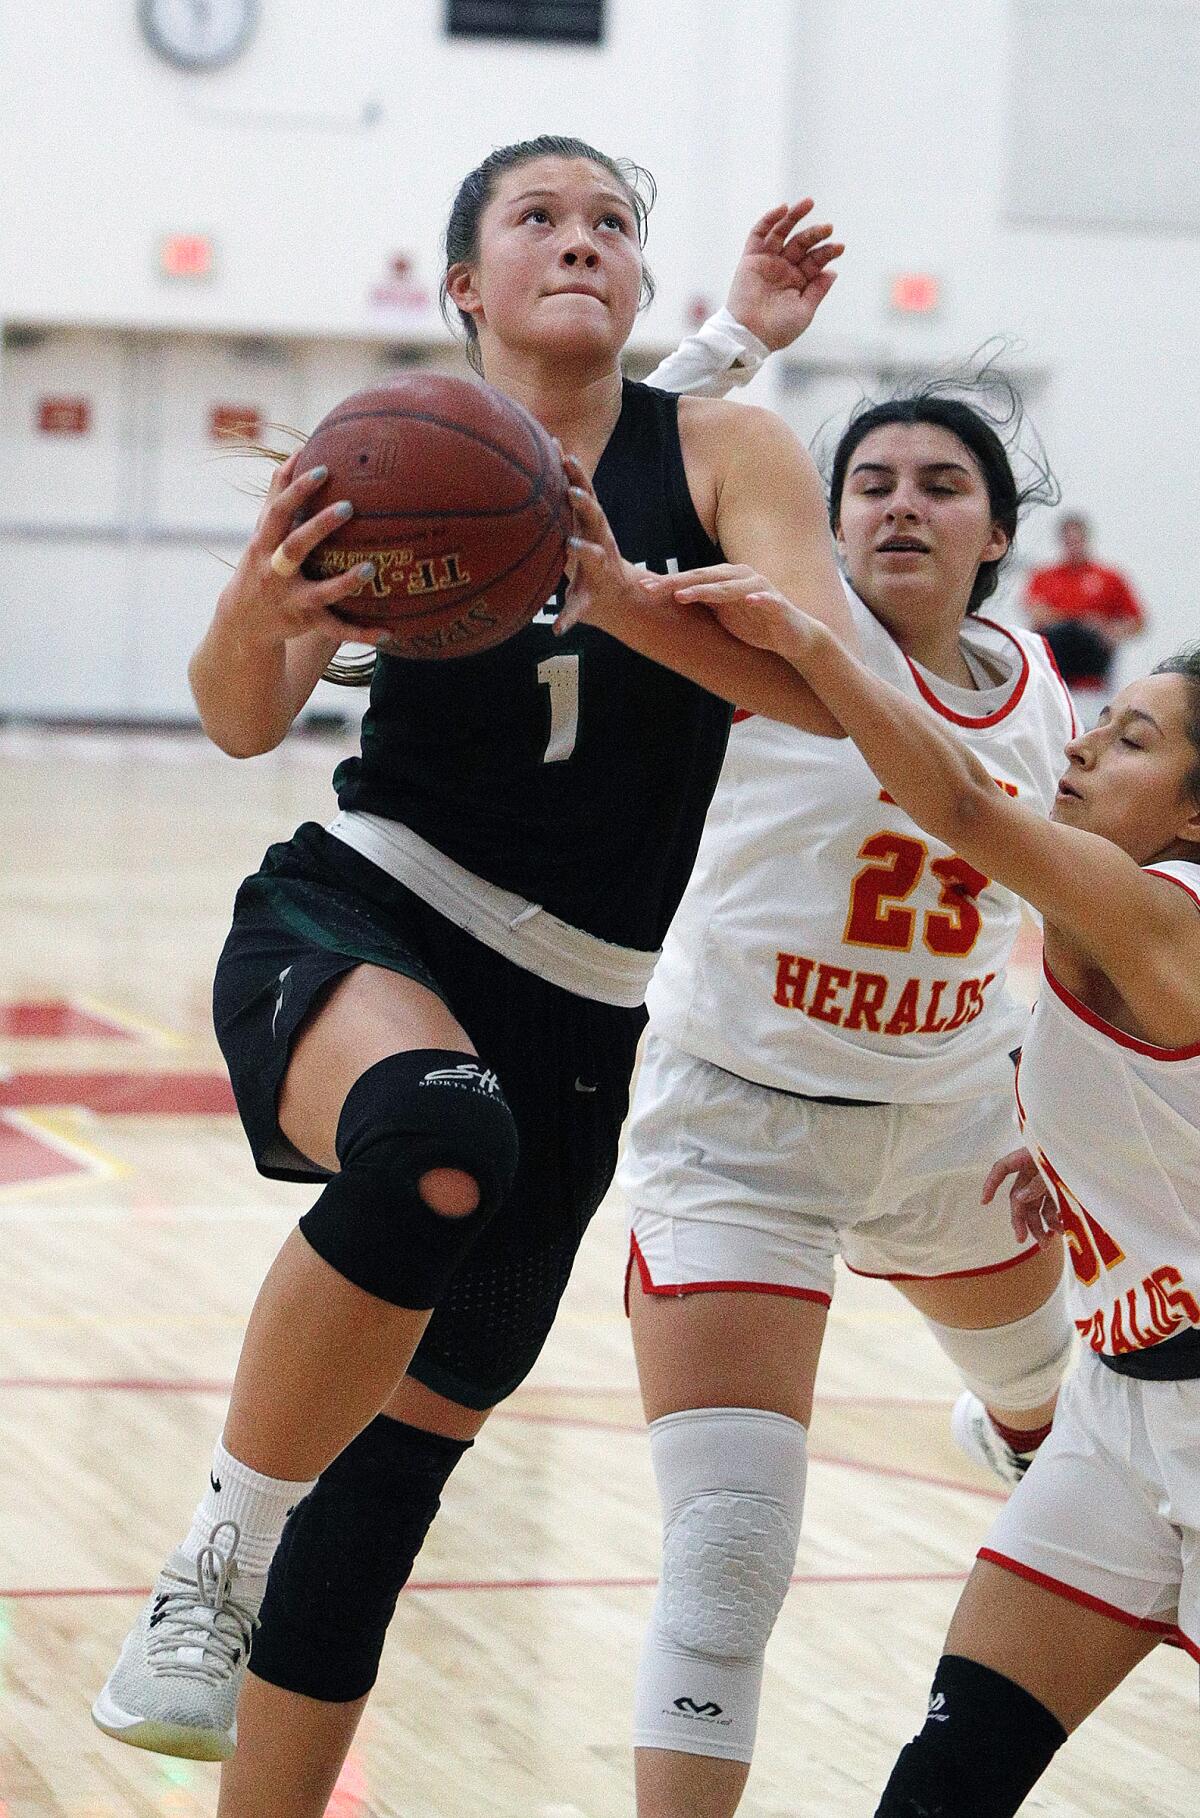 Sage Hill's Emily Elliott drives to the basket against Whittier Christian's Juliette Corona in a nonleague game in La Habra on December 12, 2019.